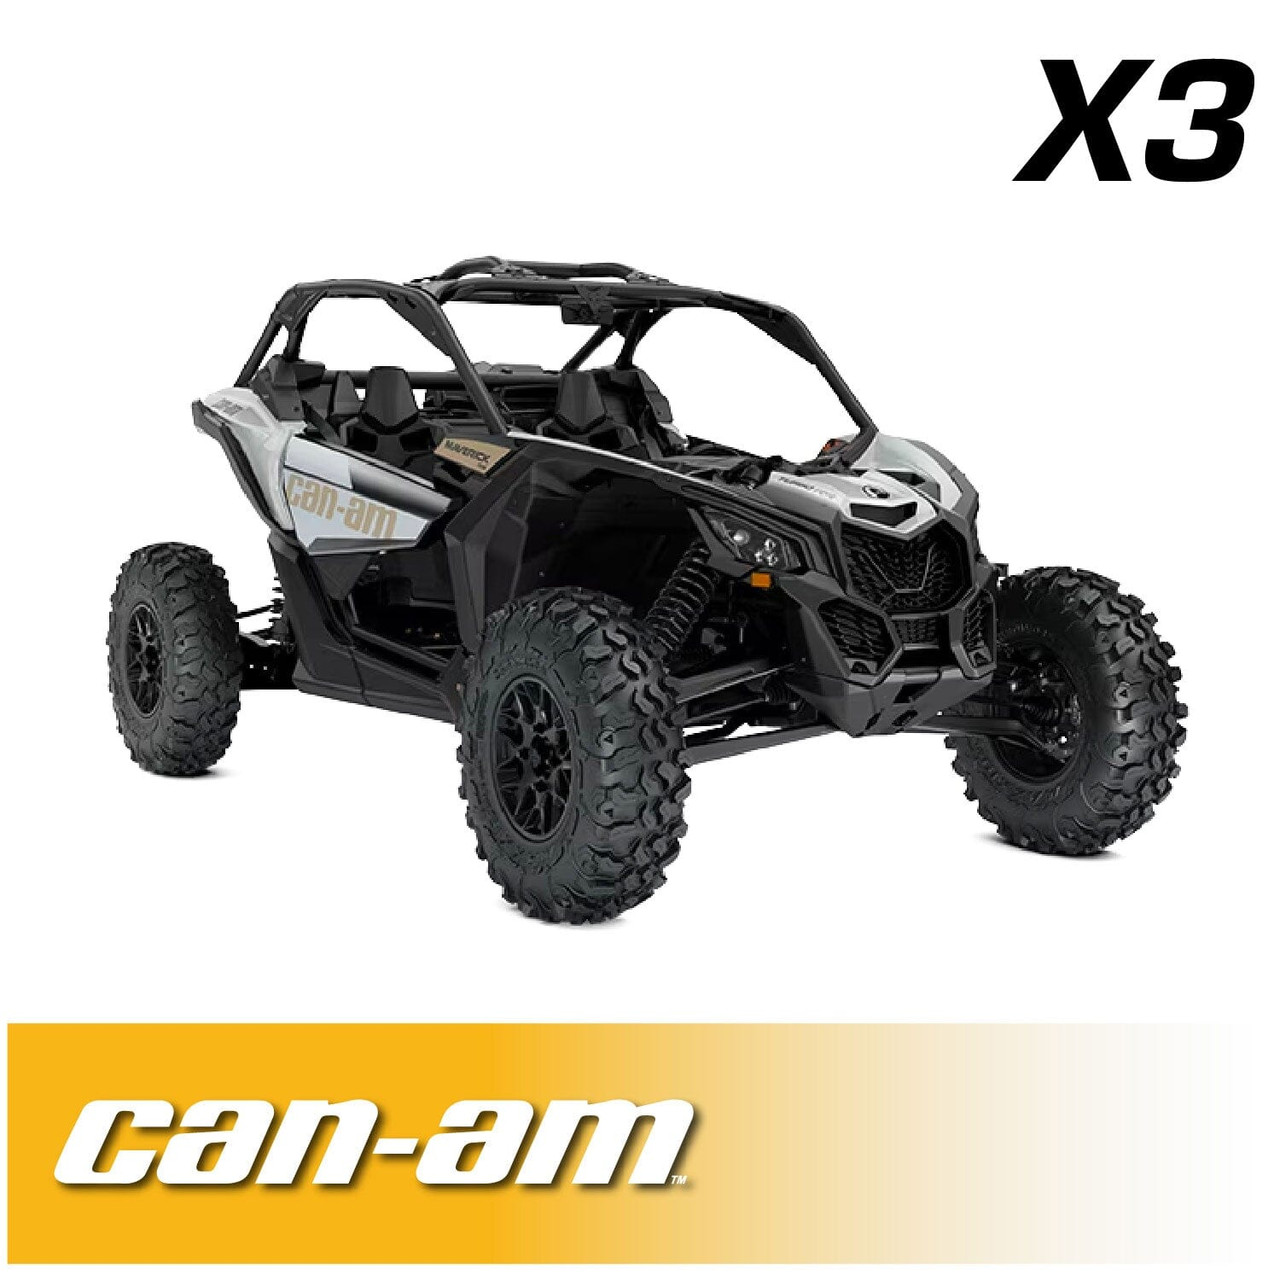 CAN-AM MAVERICK X3 COMPLETE COMMUNICATION KIT WITH INTERCOM AND 2-WAY RADIO - 696 PLUS / G1 GMRS / DASH MOUNT